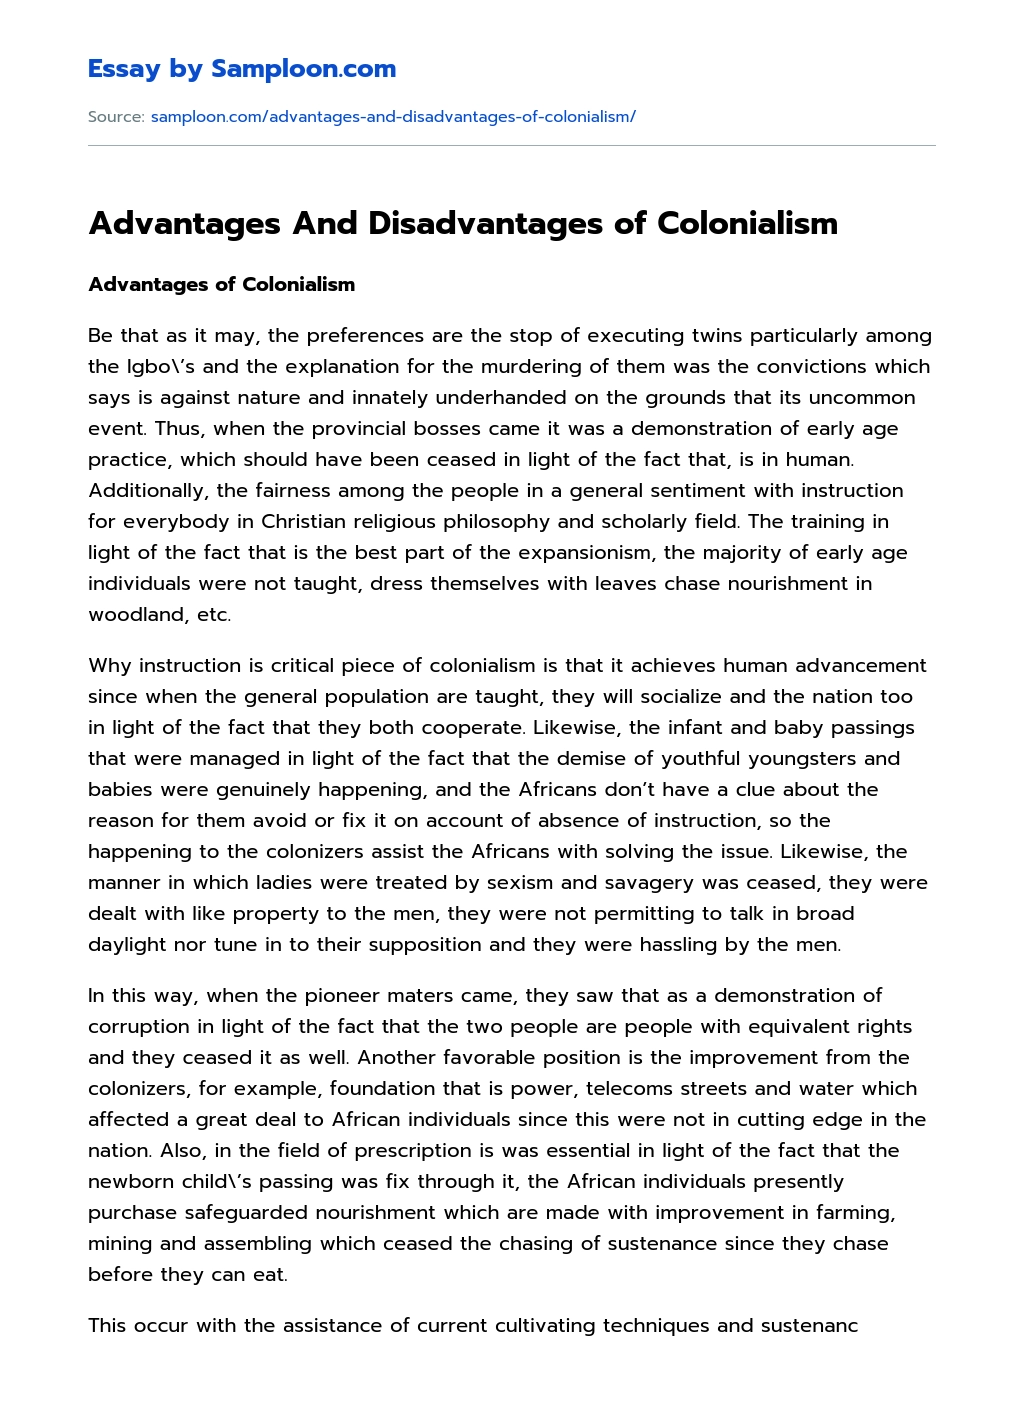 Advantages And Disadvantages of Colonialism essay